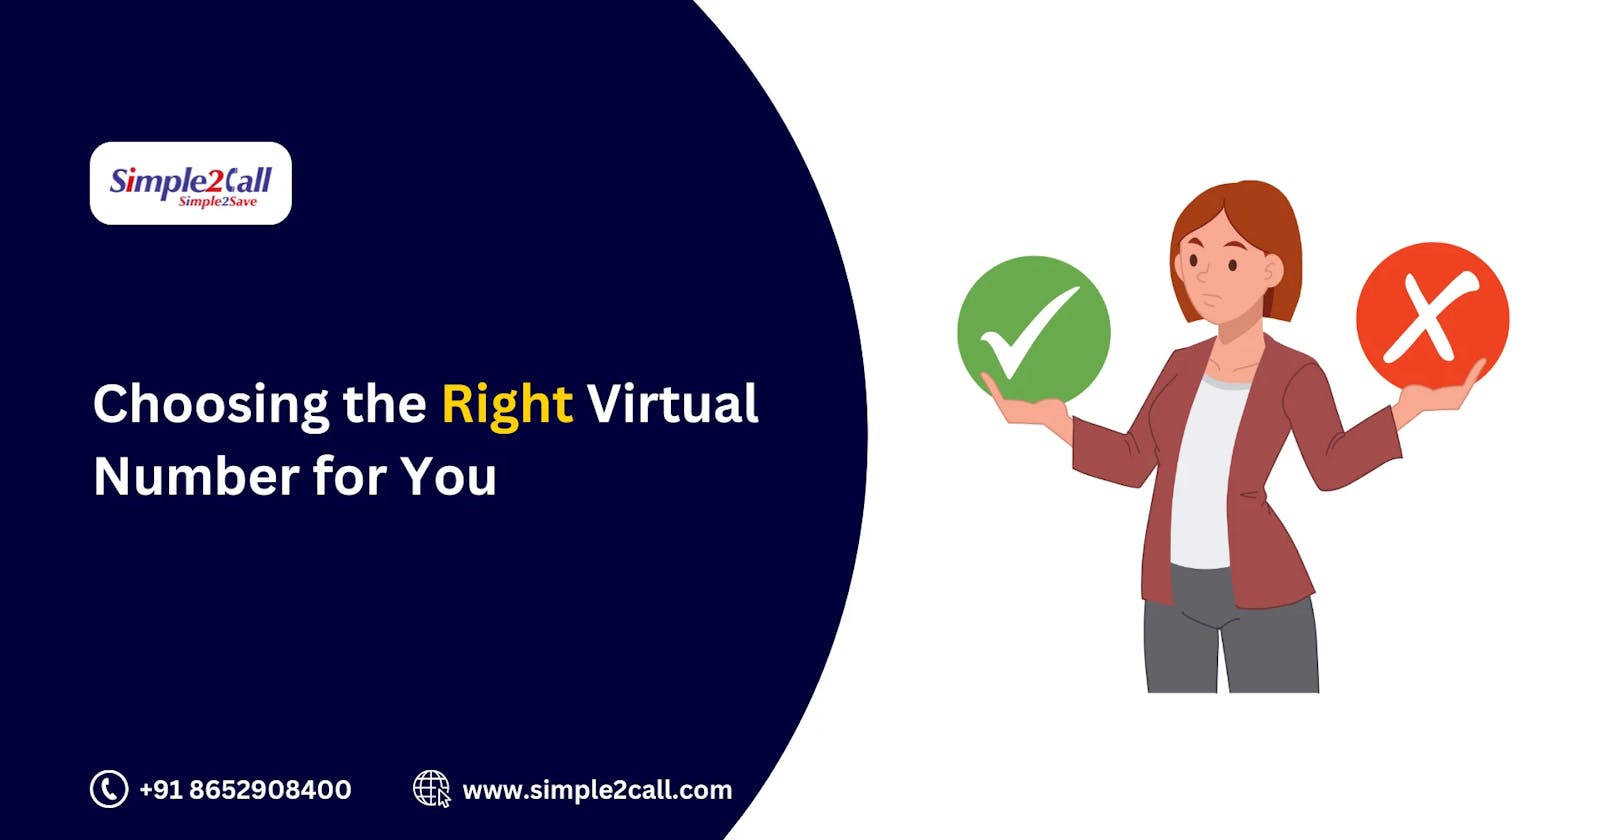 Choosing the Right Virtual Number for You